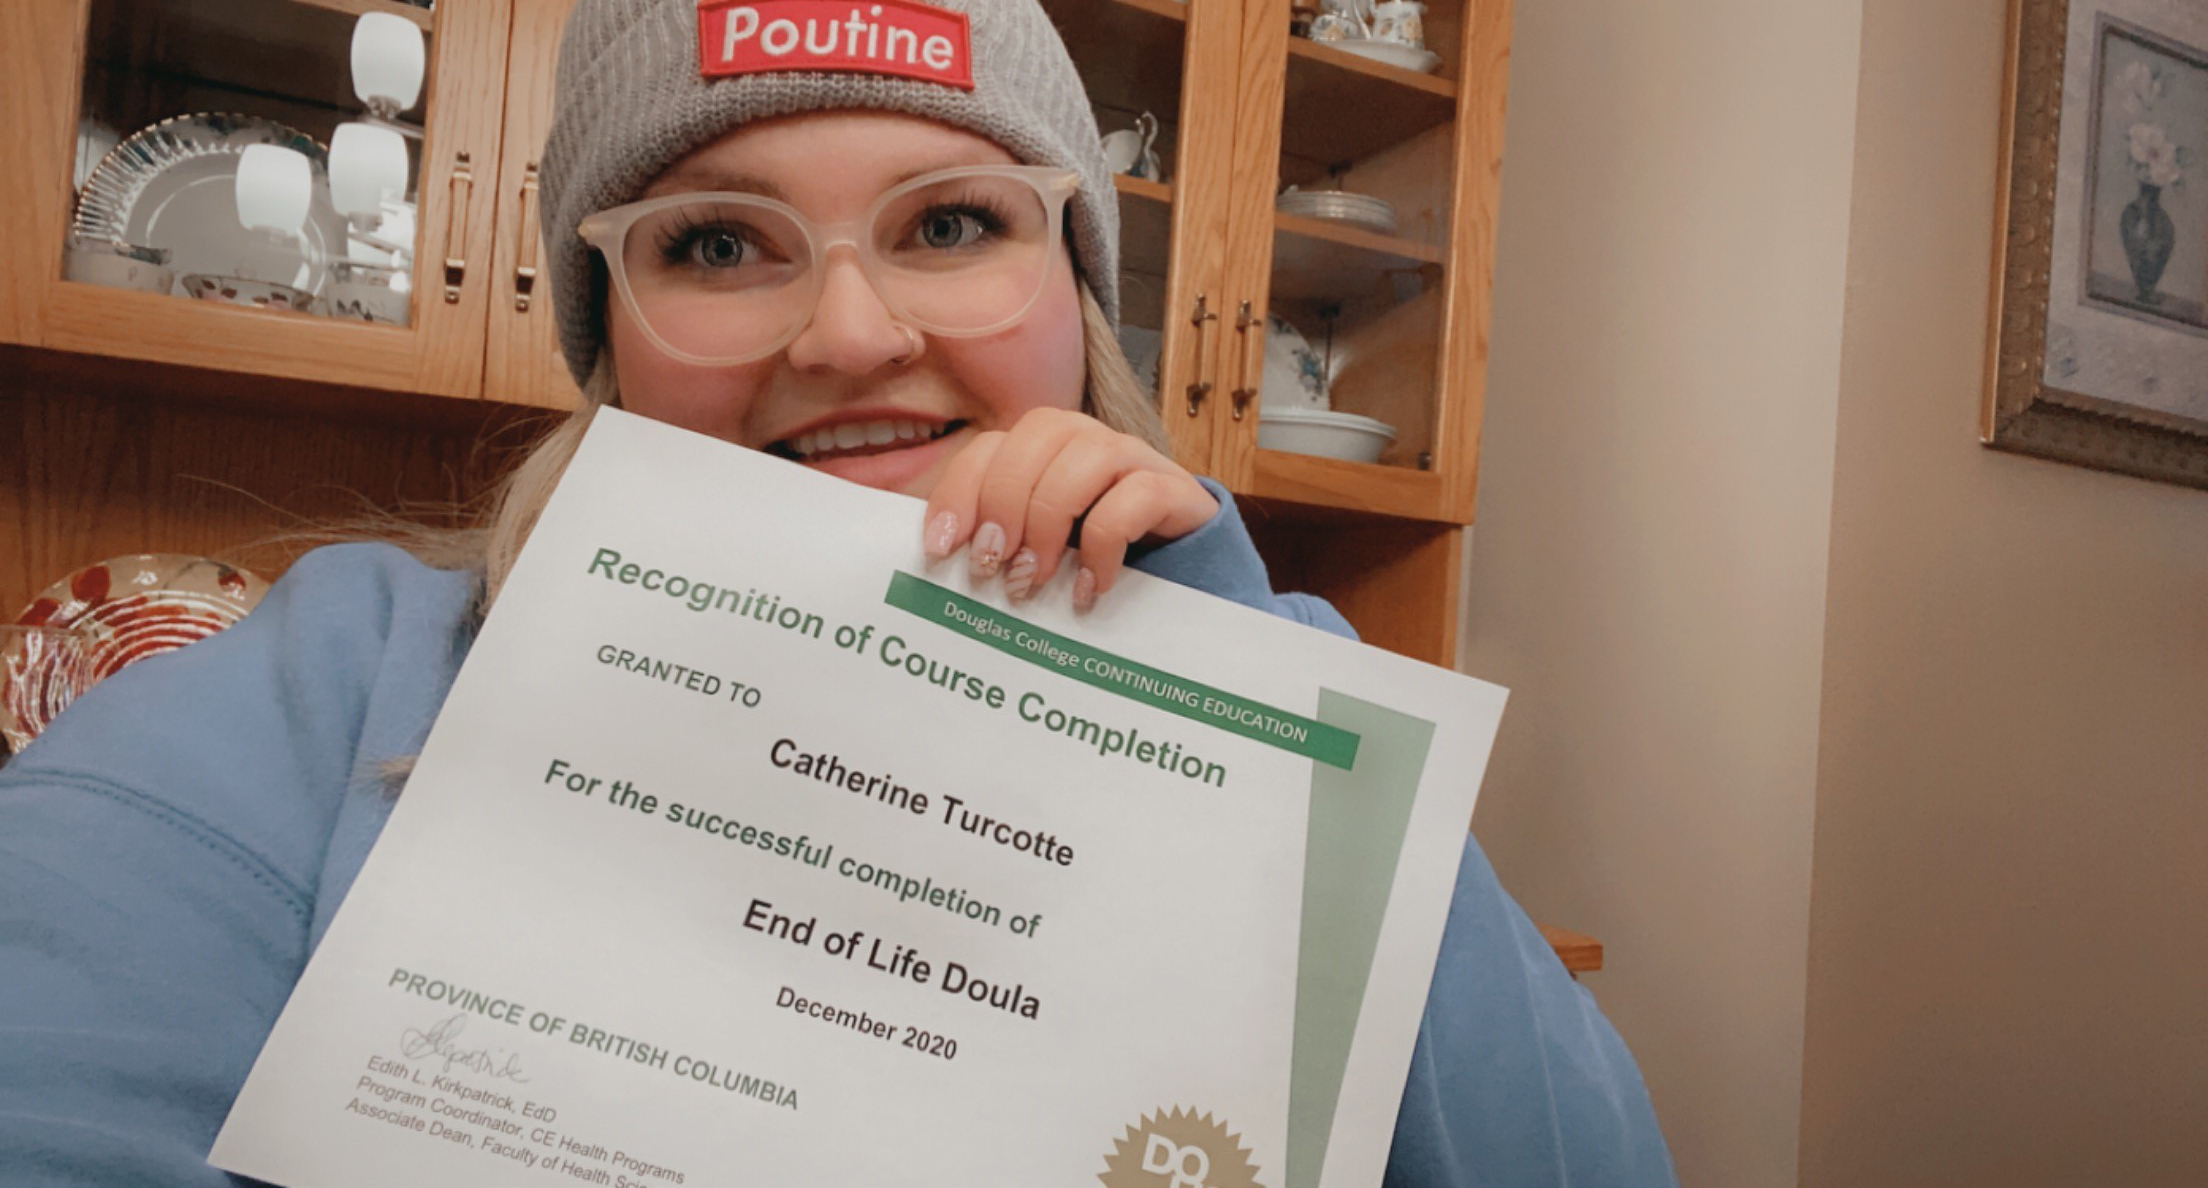 Smiling woman wearing grey poutine toque and glasses, holds End of Life Doula certificate